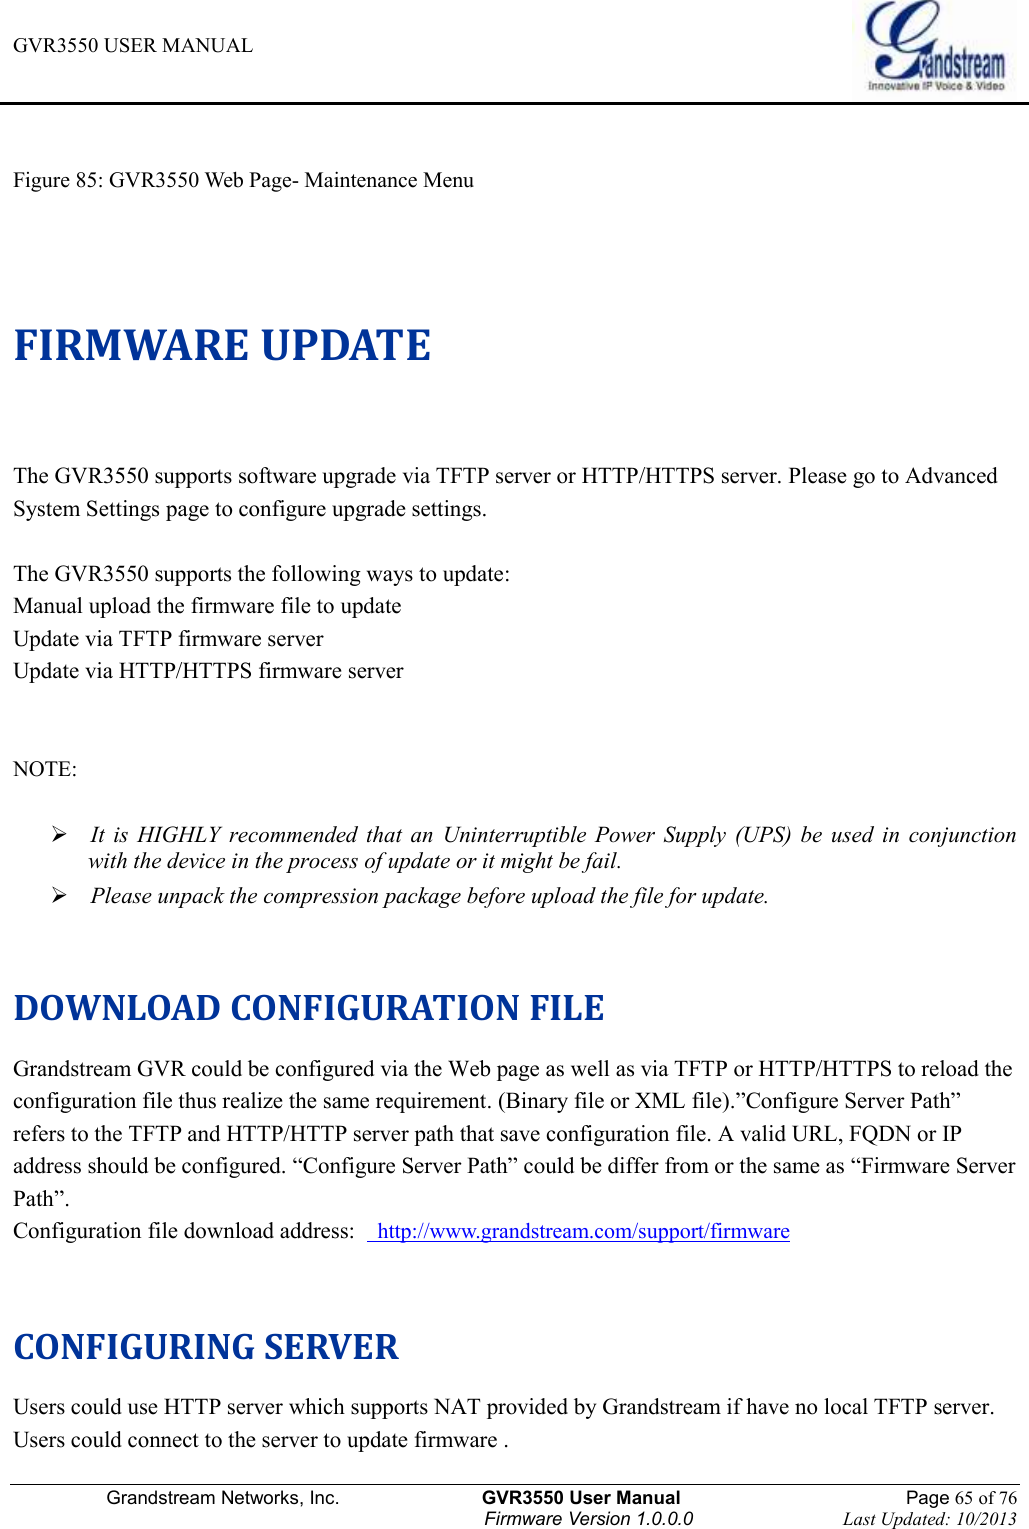 GVR3550 USER MANUAL   Grandstream Networks, Inc.                    GVR3550 User Manual                                                Page 65 of 76 Firmware Version 1.0.0.0                                Last Updated: 10/2013   Figure 85: GVR3550 Web Page- Maintenance Menu  FIRMWARE UPDATE The GVR3550 supports software upgrade via TFTP server or HTTP/HTTPS server. Please go to Advanced System Settings page to configure upgrade settings.  The GVR3550 supports the following ways to update: Manual upload the firmware file to update Update via TFTP firmware server Update via HTTP/HTTPS firmware server   NOTE:     It  is  HIGHLY  recommended  that  an  Uninterruptible  Power  Supply  (UPS)  be  used  in  conjunction with the device in the process of update or it might be fail.  Please unpack the compression package before upload the file for update.  DOWNLOAD CONFIGURATION FILE Grandstream GVR could be configured via the Web page as well as via TFTP or HTTP/HTTPS to reload the configuration file thus realize the same requirement. (Binary file or XML file).”Configure Server Path” refers to the TFTP and HTTP/HTTP server path that save configuration file. A valid URL, FQDN or IP address should be configured. “Configure Server Path” could be differ from or the same as “Firmware Server Path”. Configuration file download address:    http://www.grandstream.com/support/firmware  CONFIGURING SERVER Users could use HTTP server which supports NAT provided by Grandstream if have no local TFTP server. Users could connect to the server to update firmware . 